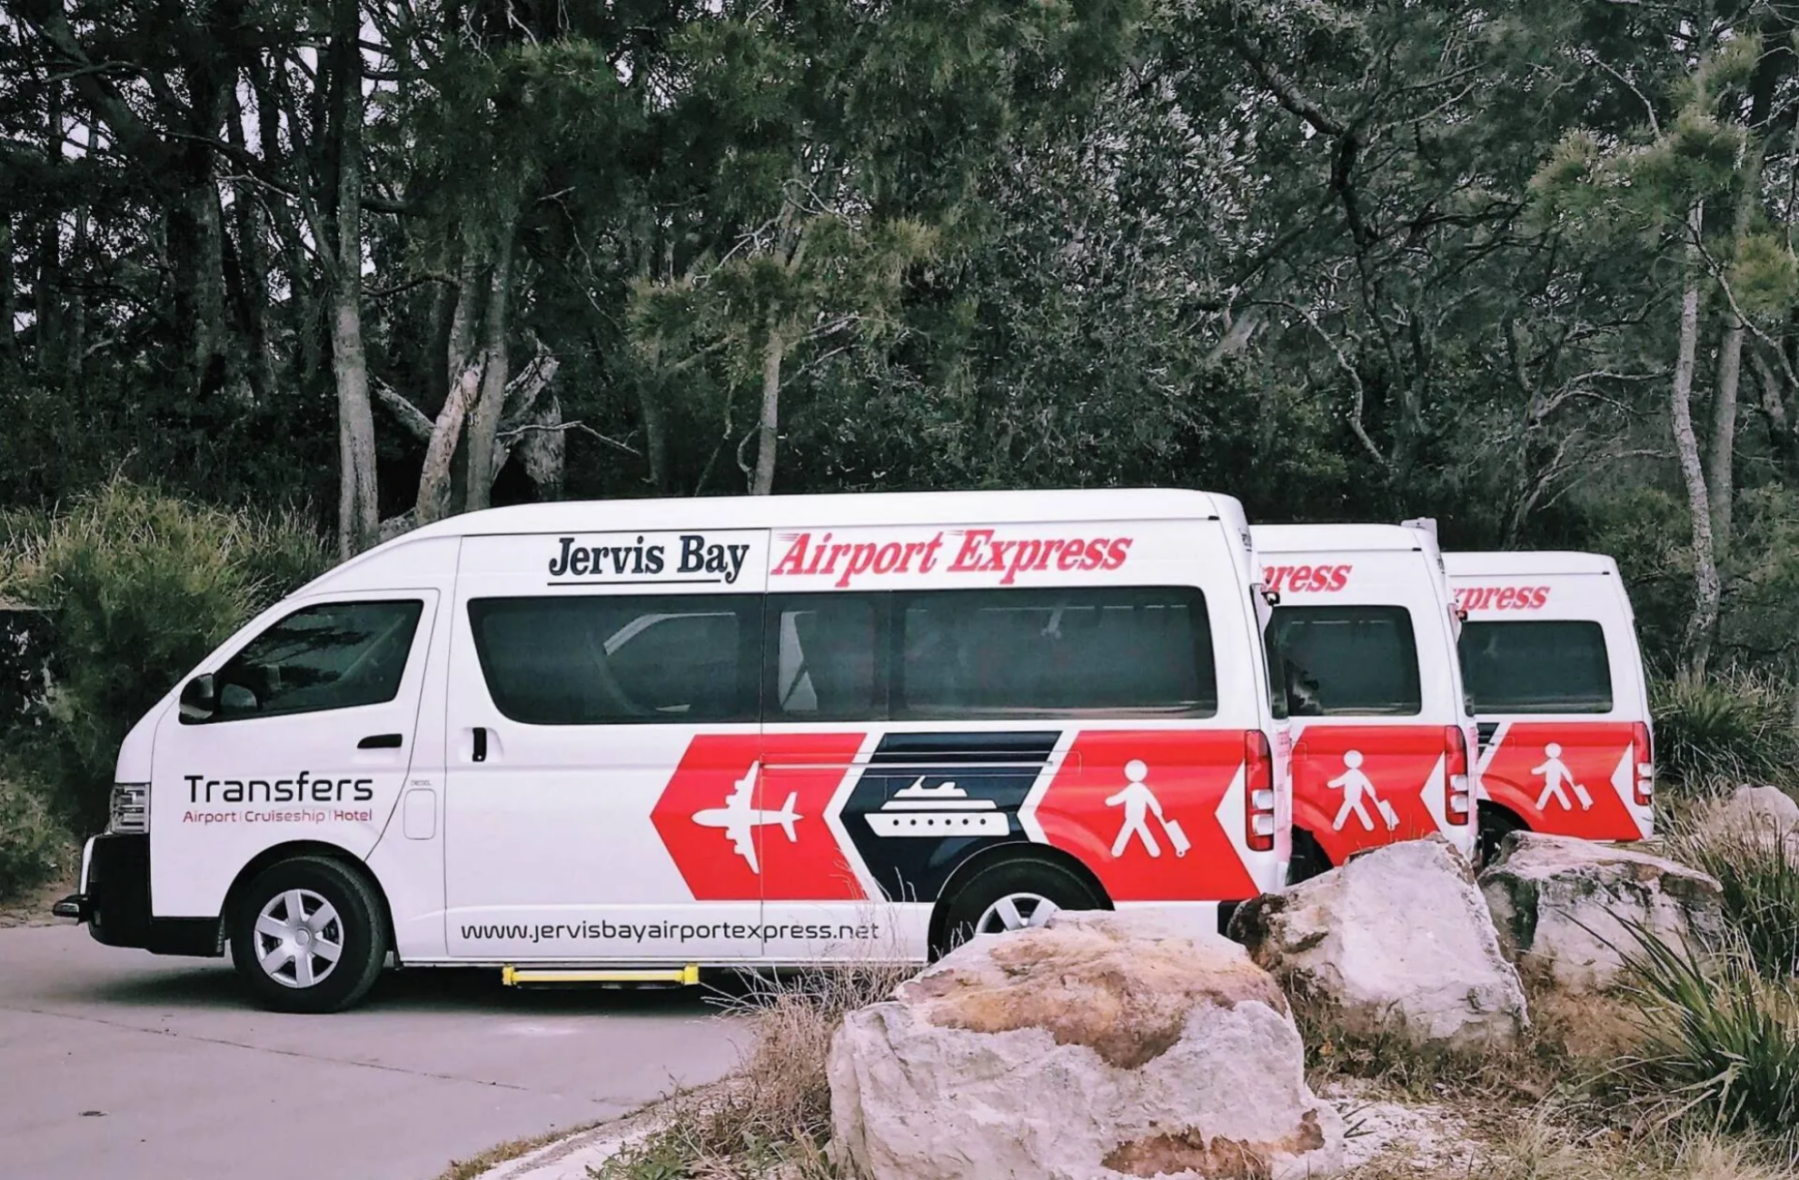 Jervis Bay Airport Express